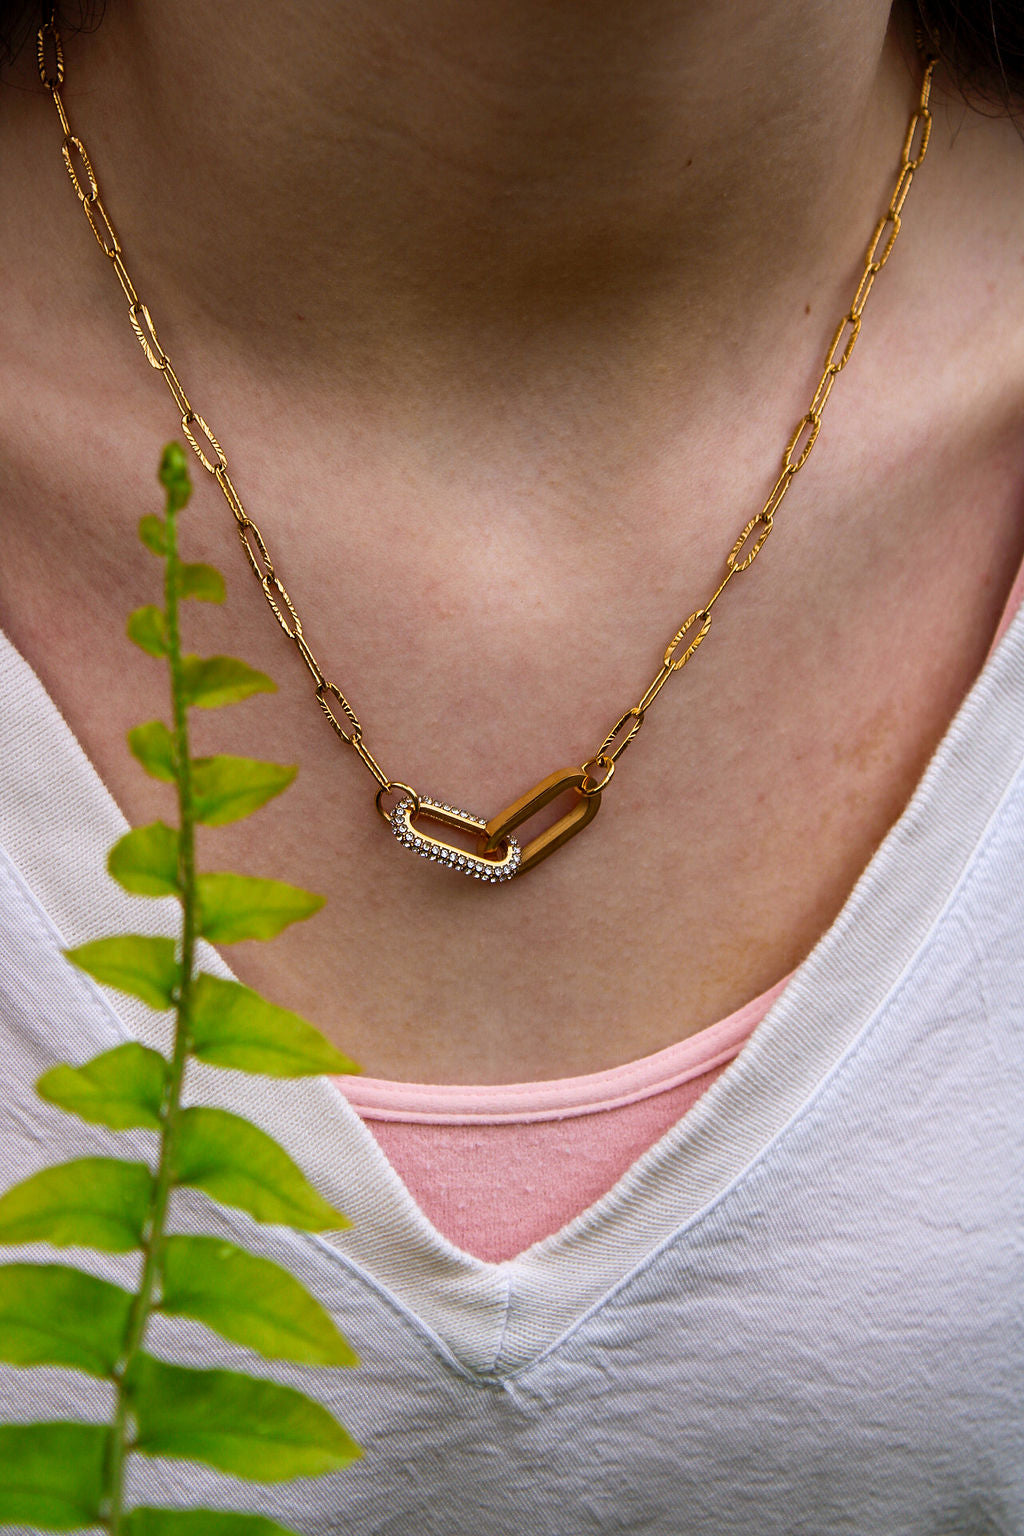 Link It Up Necklace in 18K Gold-Plated Stainless Steel